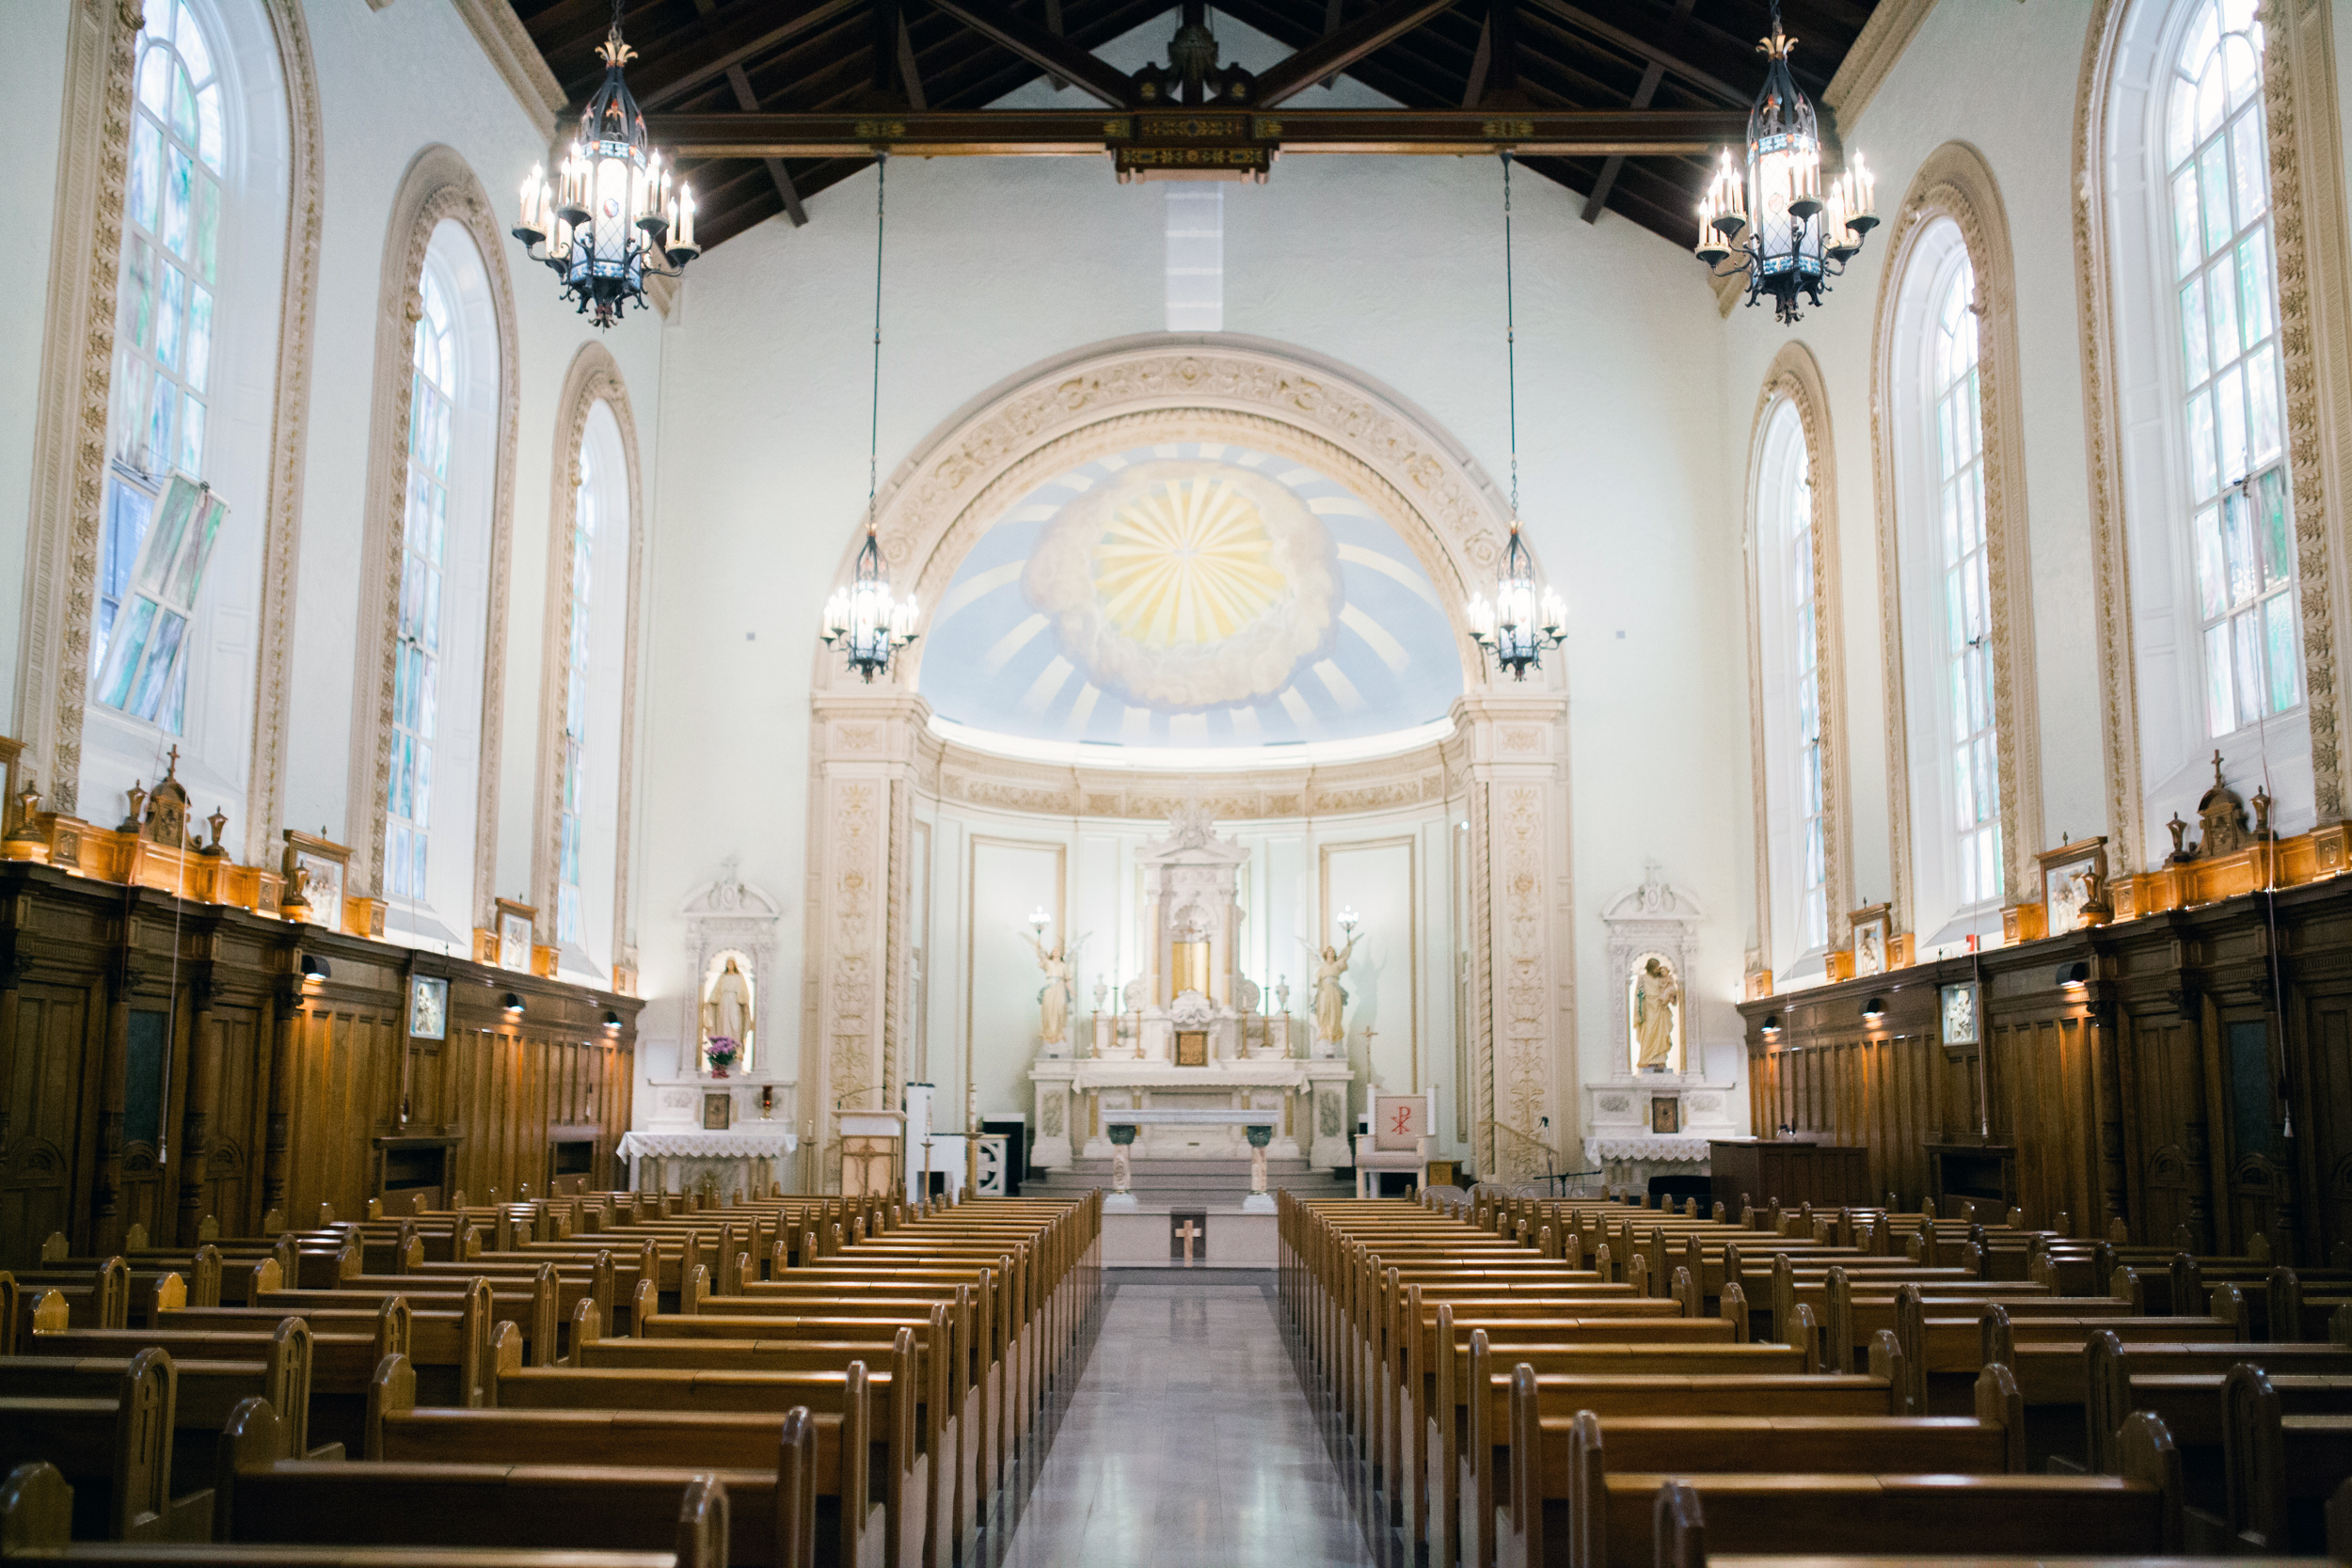 Loretto Academy’s Crown Jewel — Newly renovated St. Joseph Chapel on the Loretto Academy campus in El Paso shines in all its glory, standing ready for Mass, concerts and other celebrations.